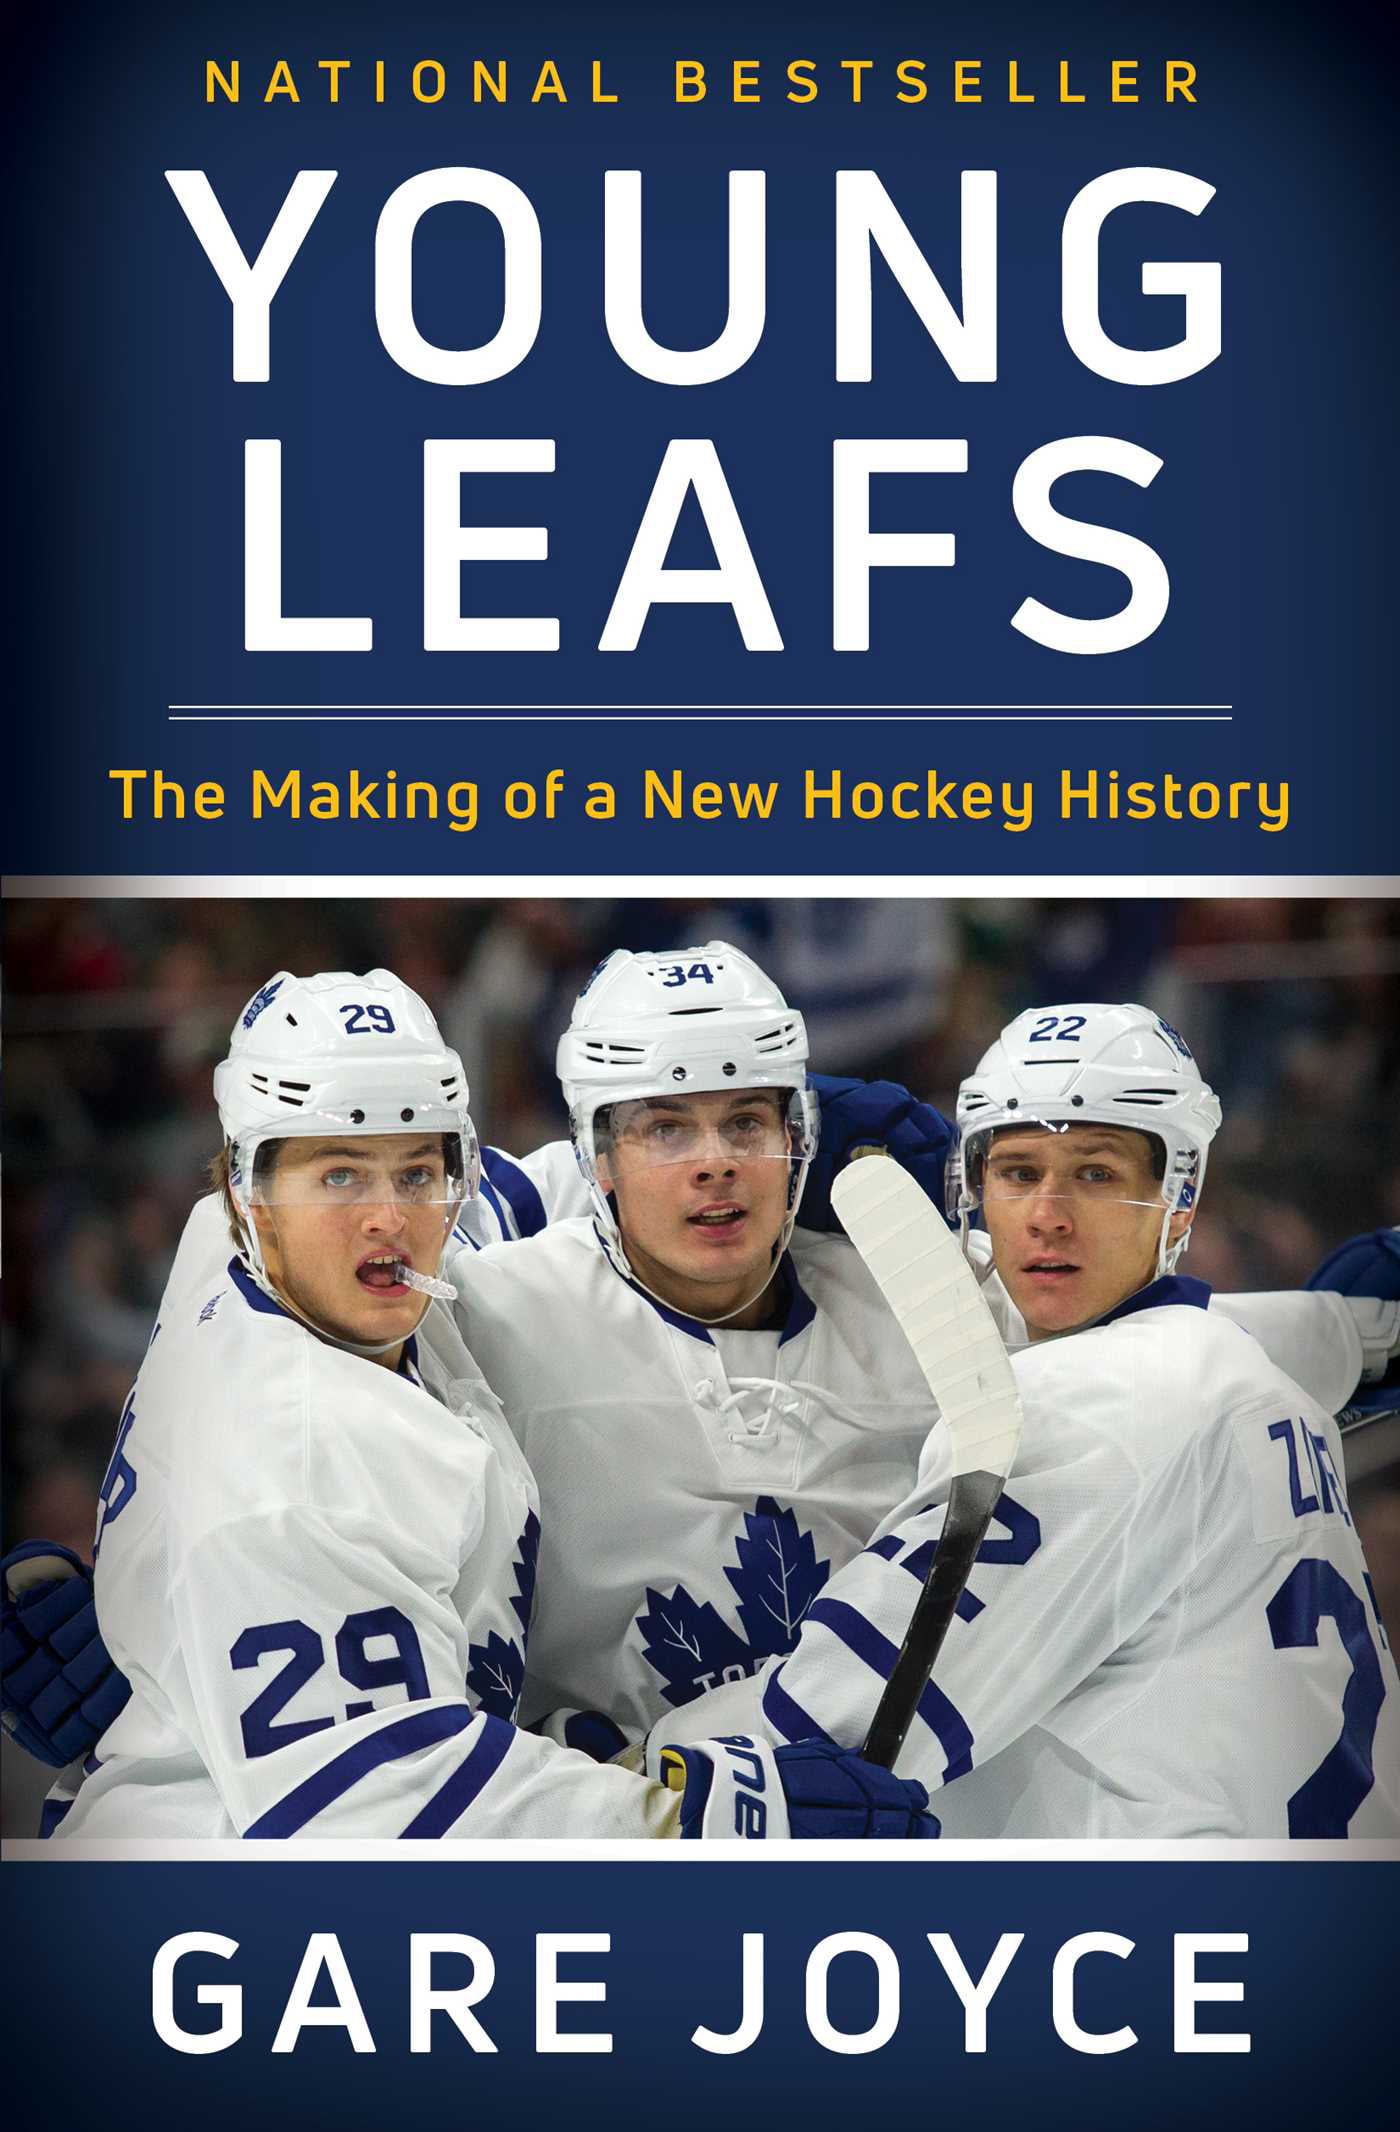 Young-Leafs-The-Making-of-a-New-Hockey-History